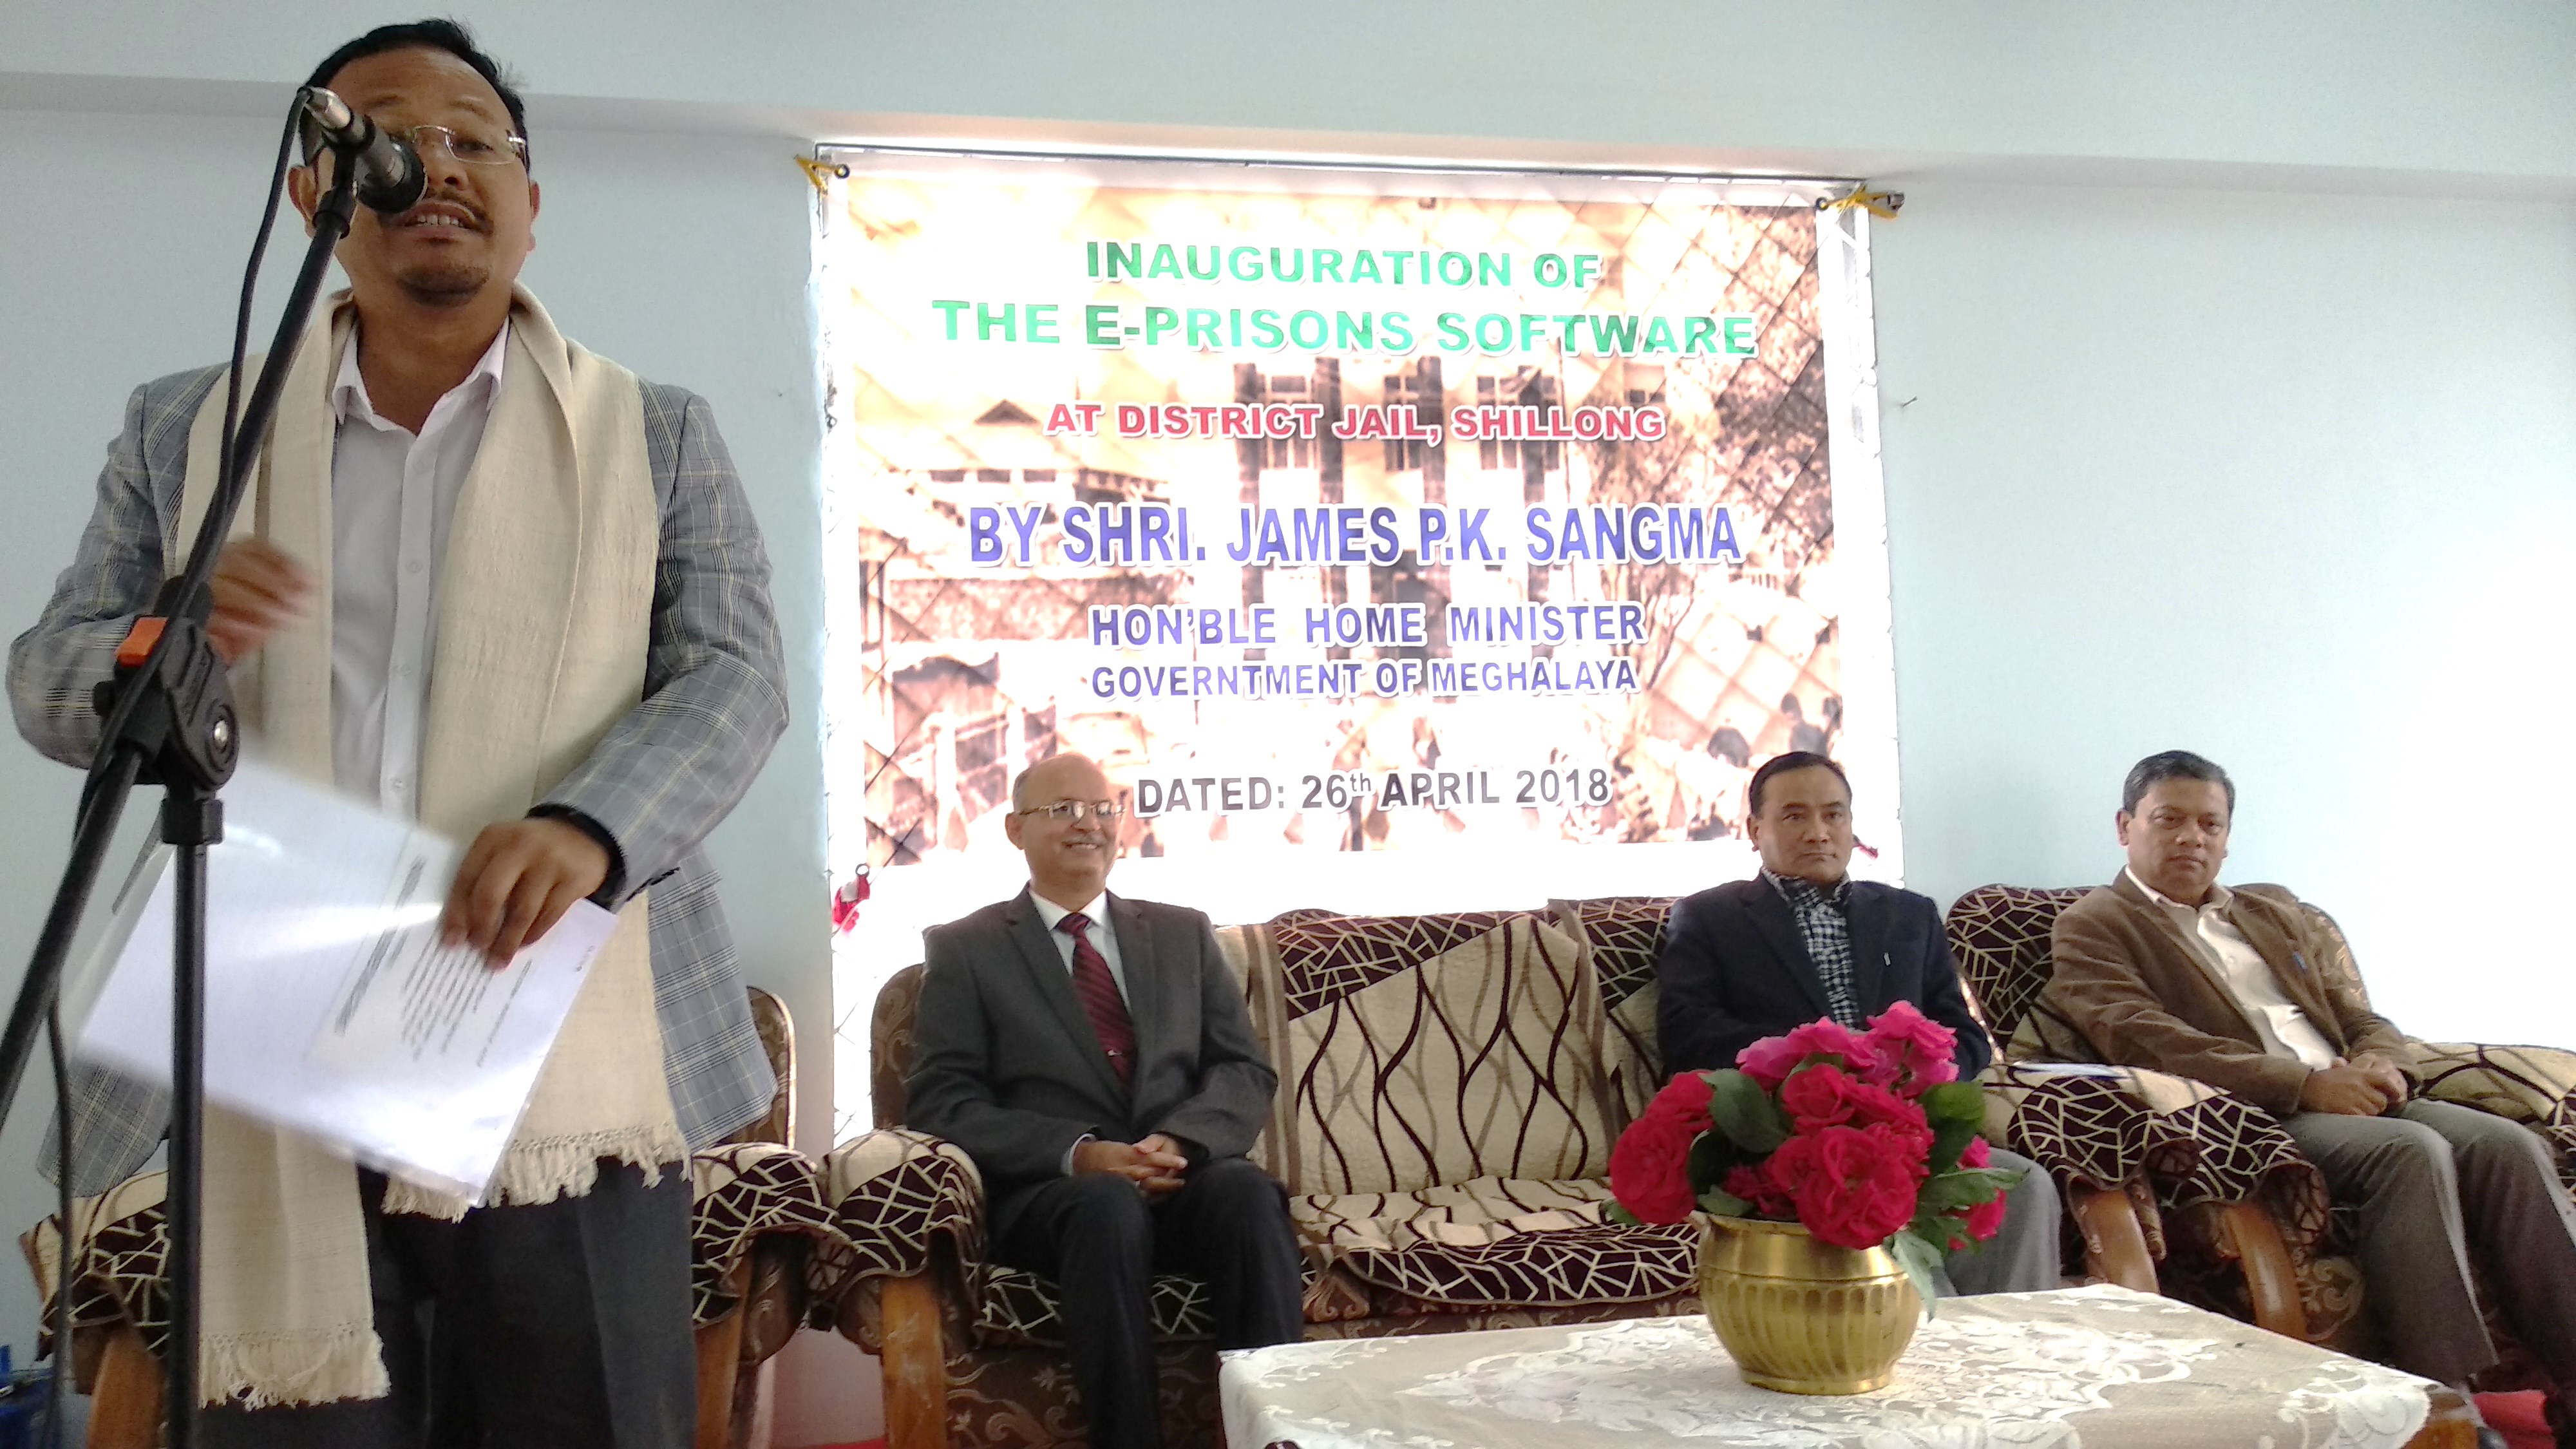 Chief Guest Shri. James P.K.Sangma Hon'ble Home Minister giving a speech on the occasion